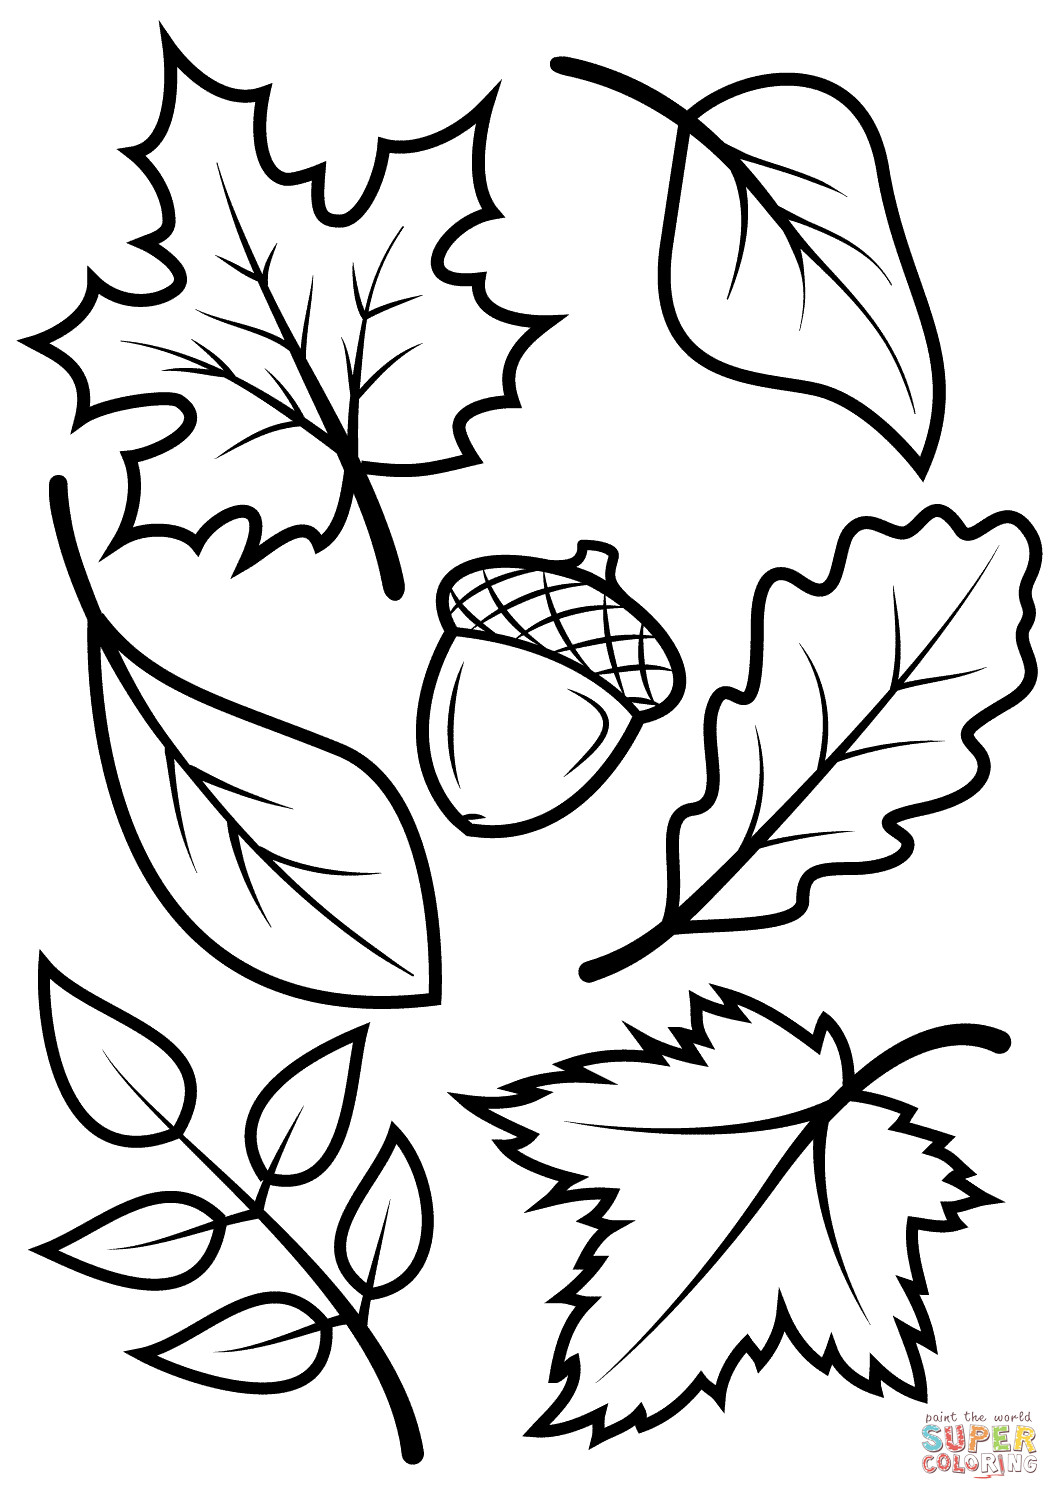 Printable Coloring Pages Fall
 Fall Leaves and Acorn coloring page